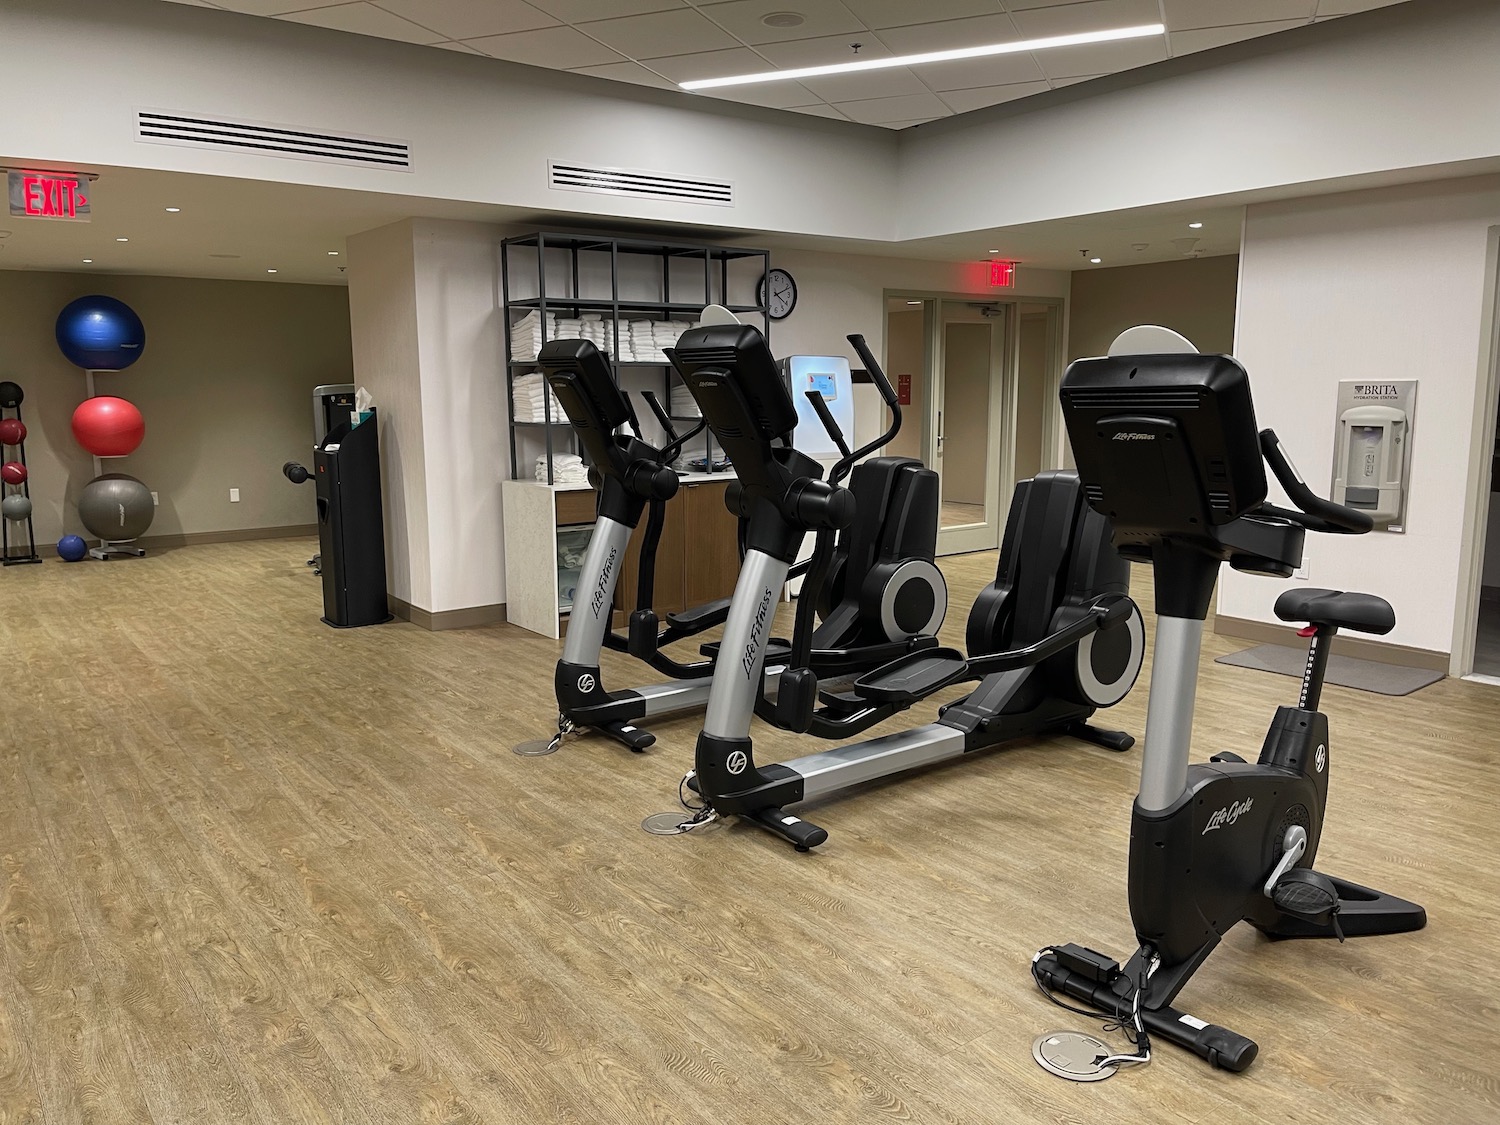 a room with exercise bikes and a wood floor